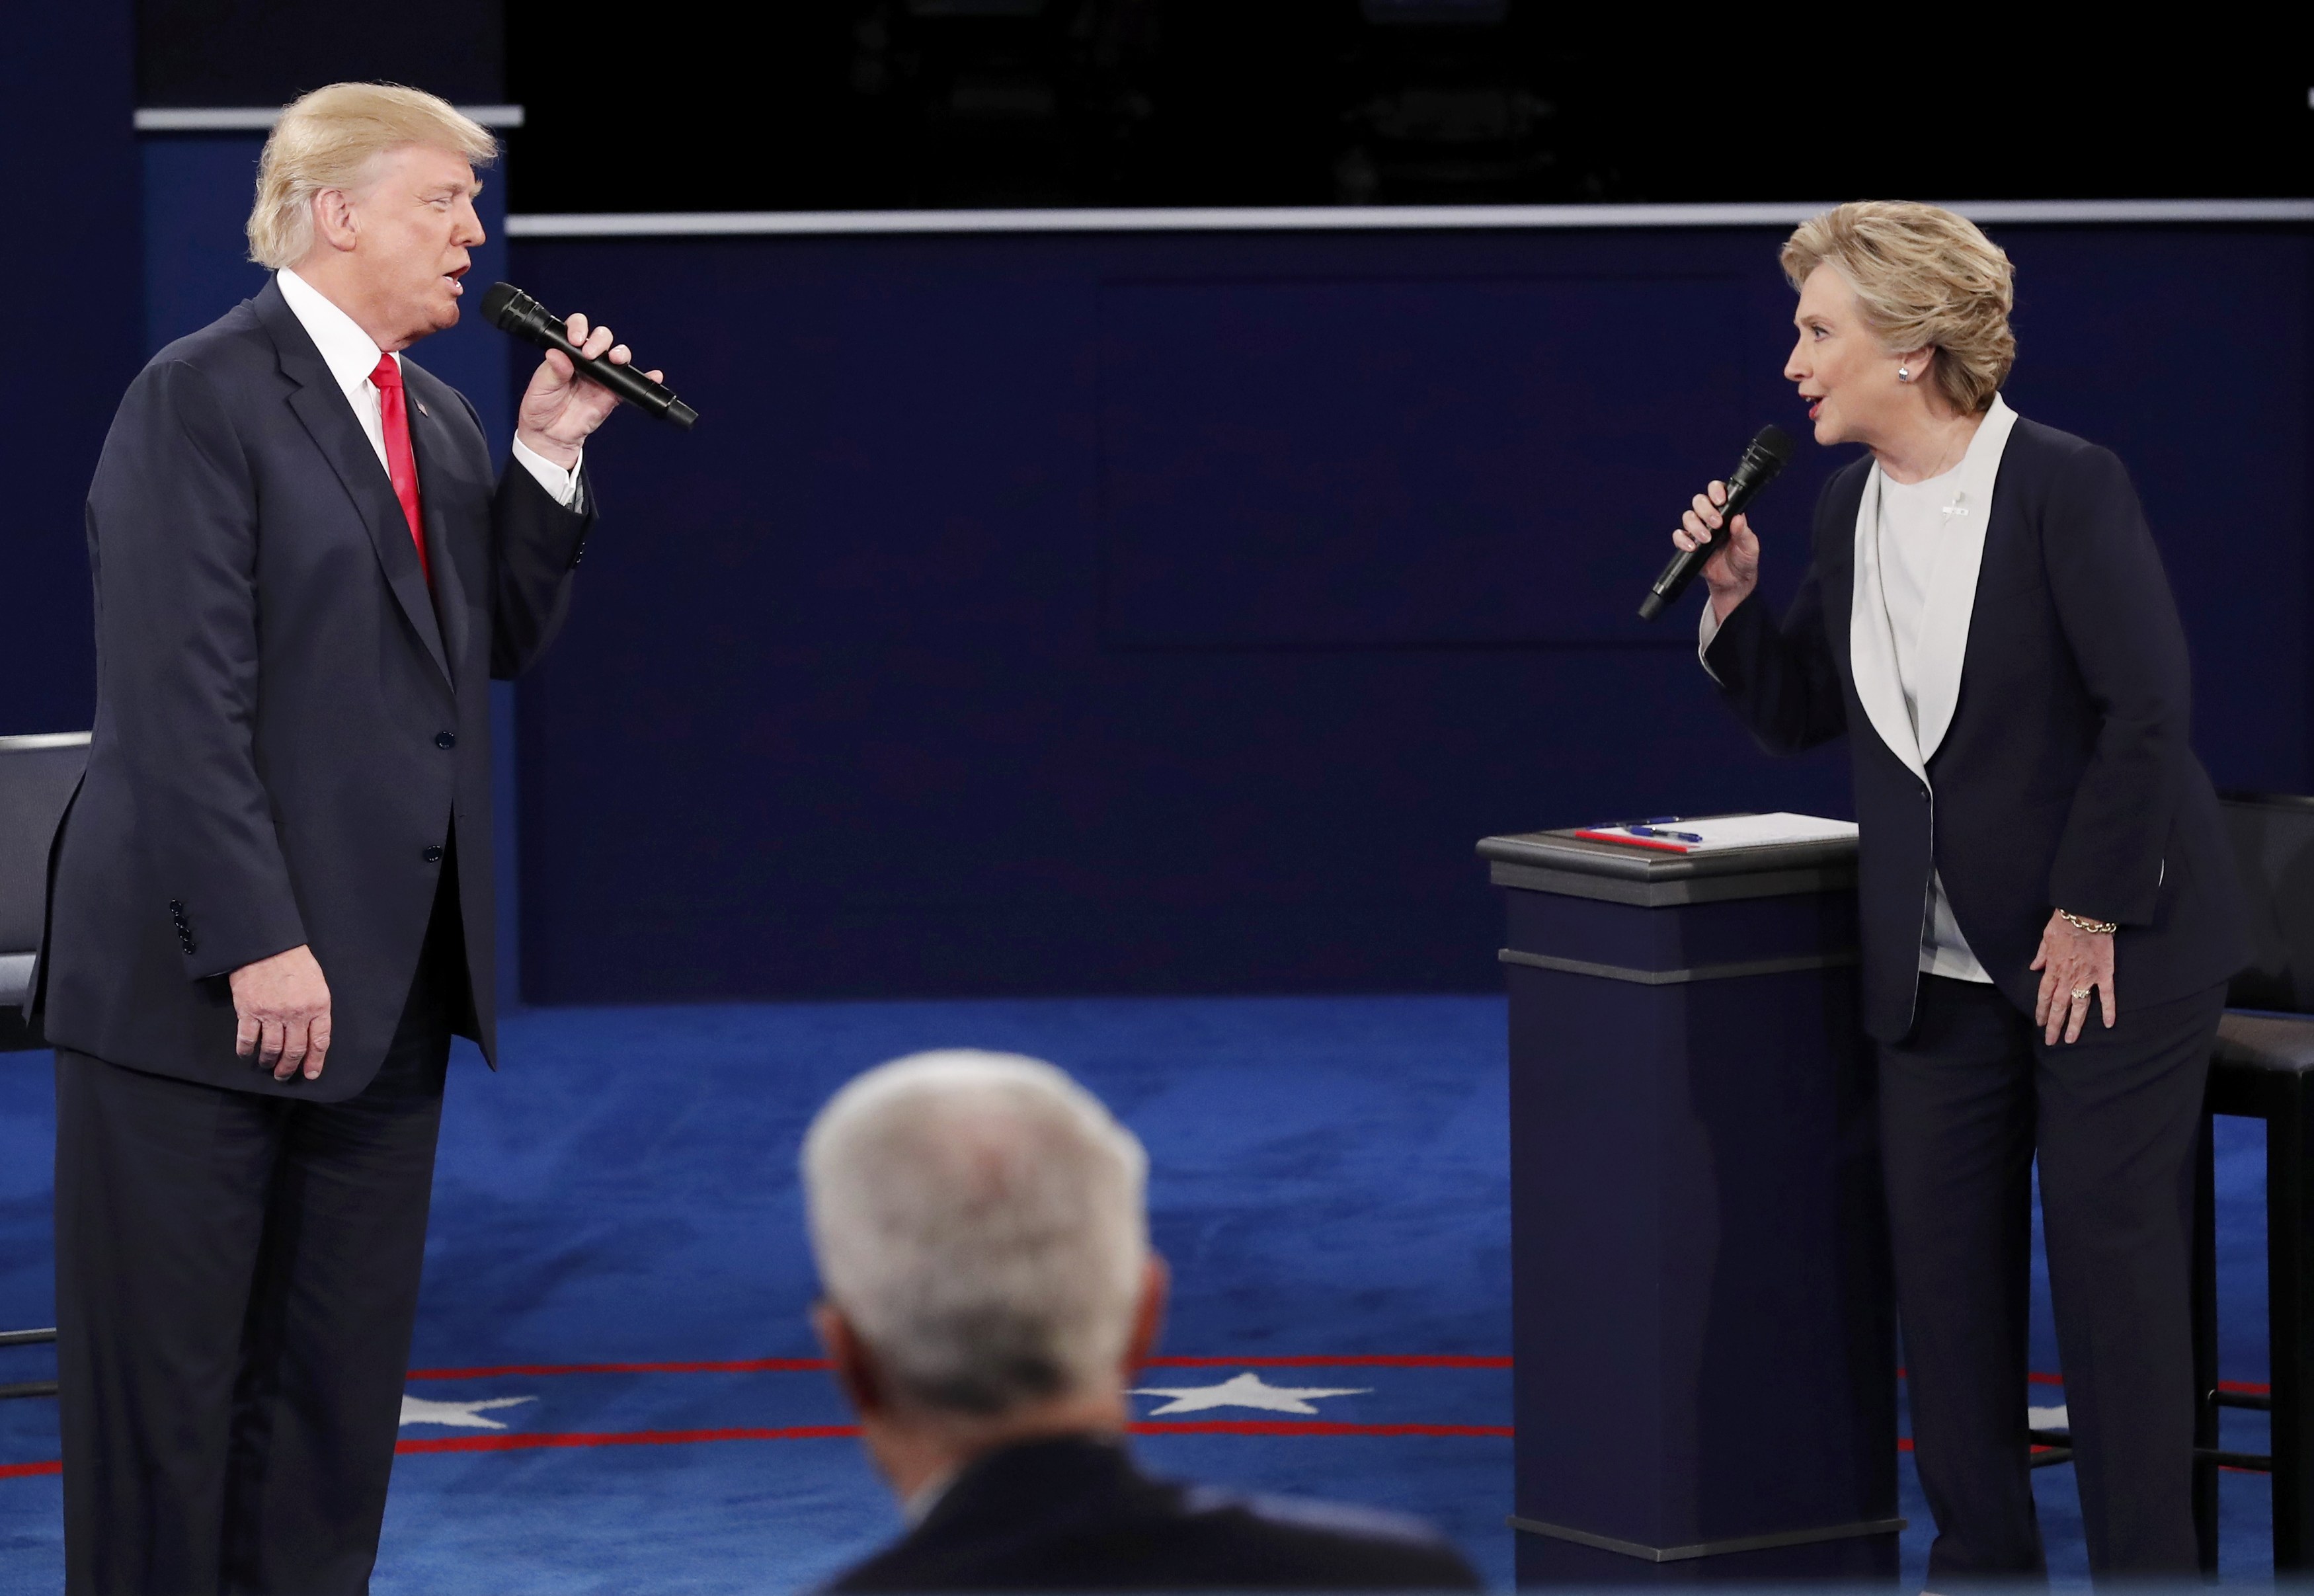 Republican U.S. presidential nominee Donald Trump and Democratic presidential nominee Hillary Clinton speak during their Oct. 9 presidential town hall debate at Washington University in St. Louis. (CNS photo/Jim Young, Reuters)